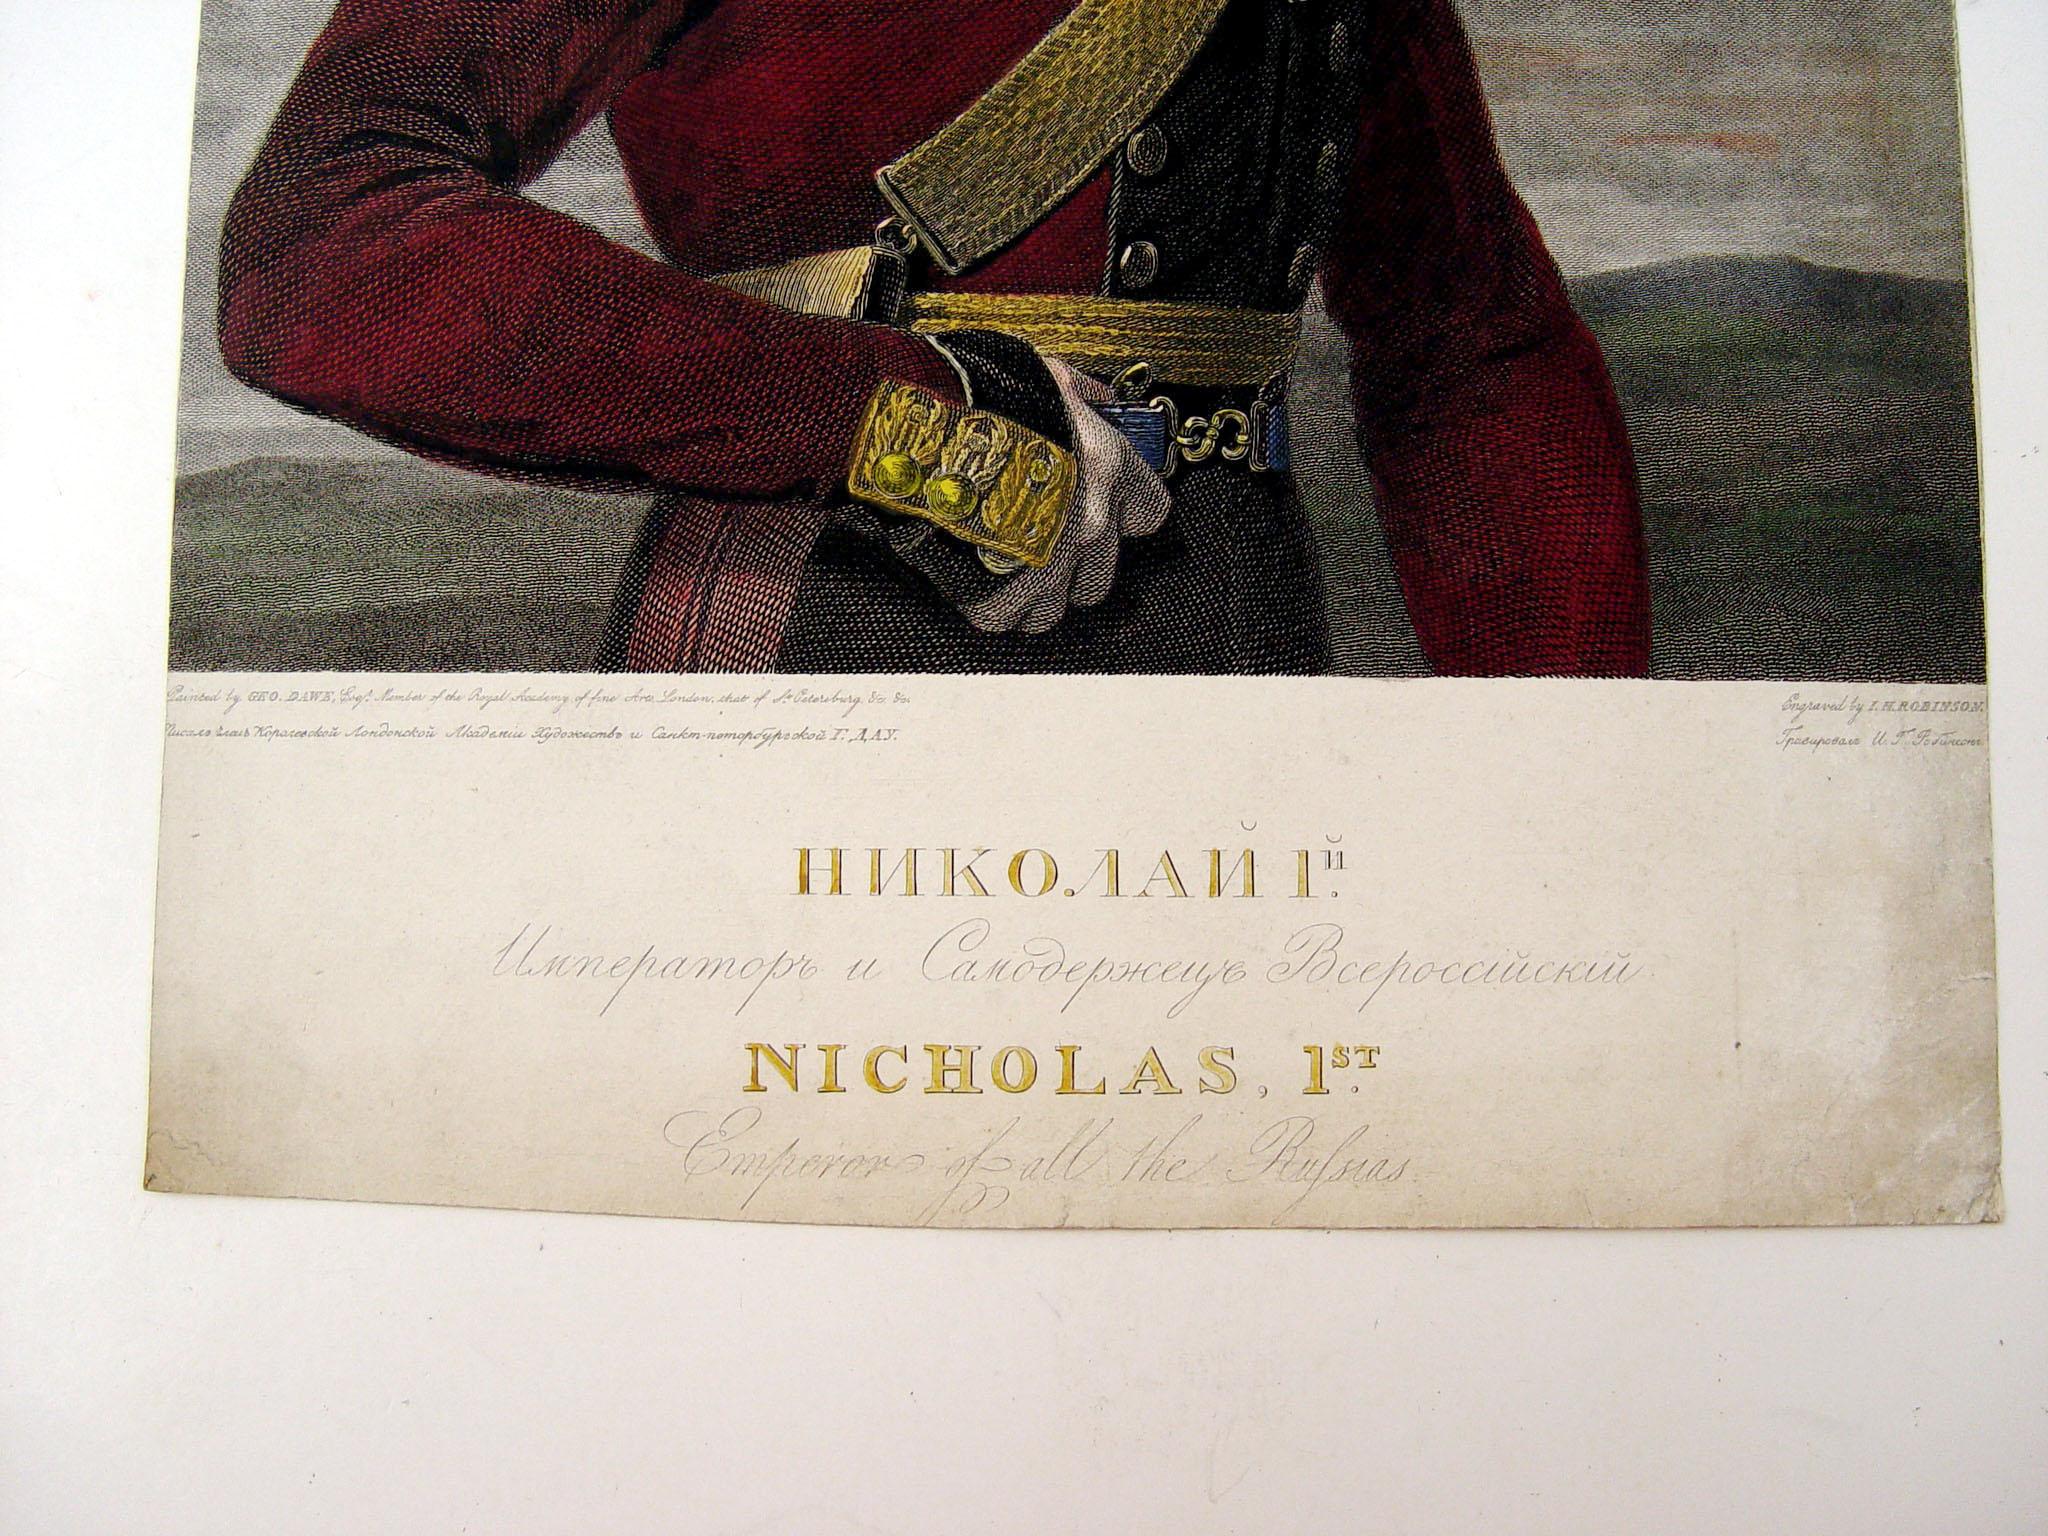 1826 hand-colored engraving of Nicolas 1st, Emperor of Russia. Printed by George Dawe and engraved by John Henry Robinson. Unframed, small edge paper loss, some age toning at edges.